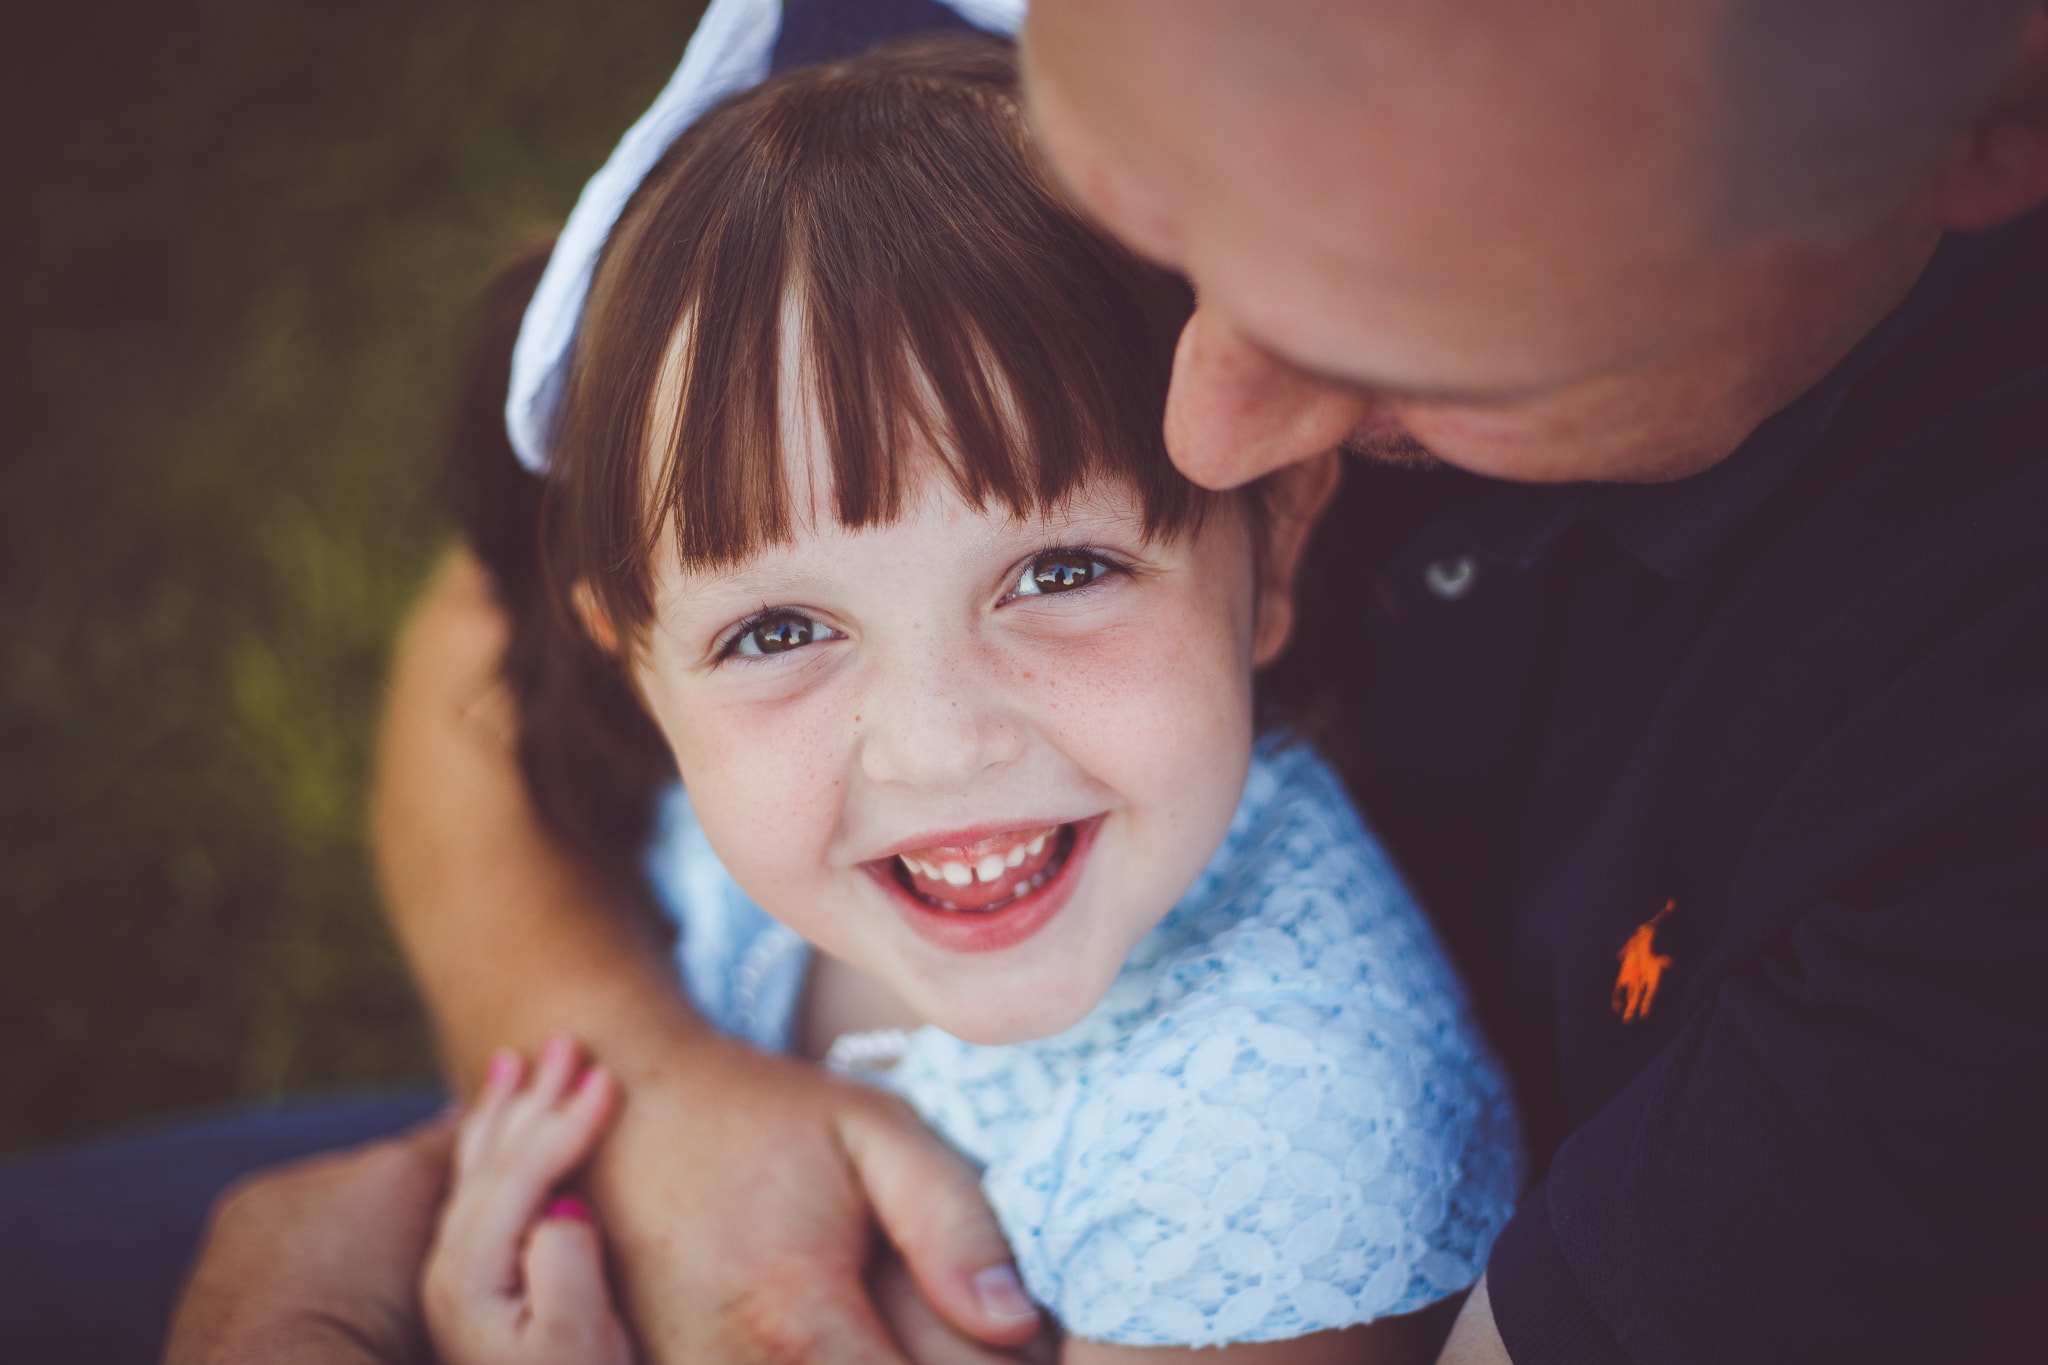 A father holds his daughter in his arms as she looks up and smiles big for the camera - Child Photographer - L+R Photography - Tulsa, Oklahoma